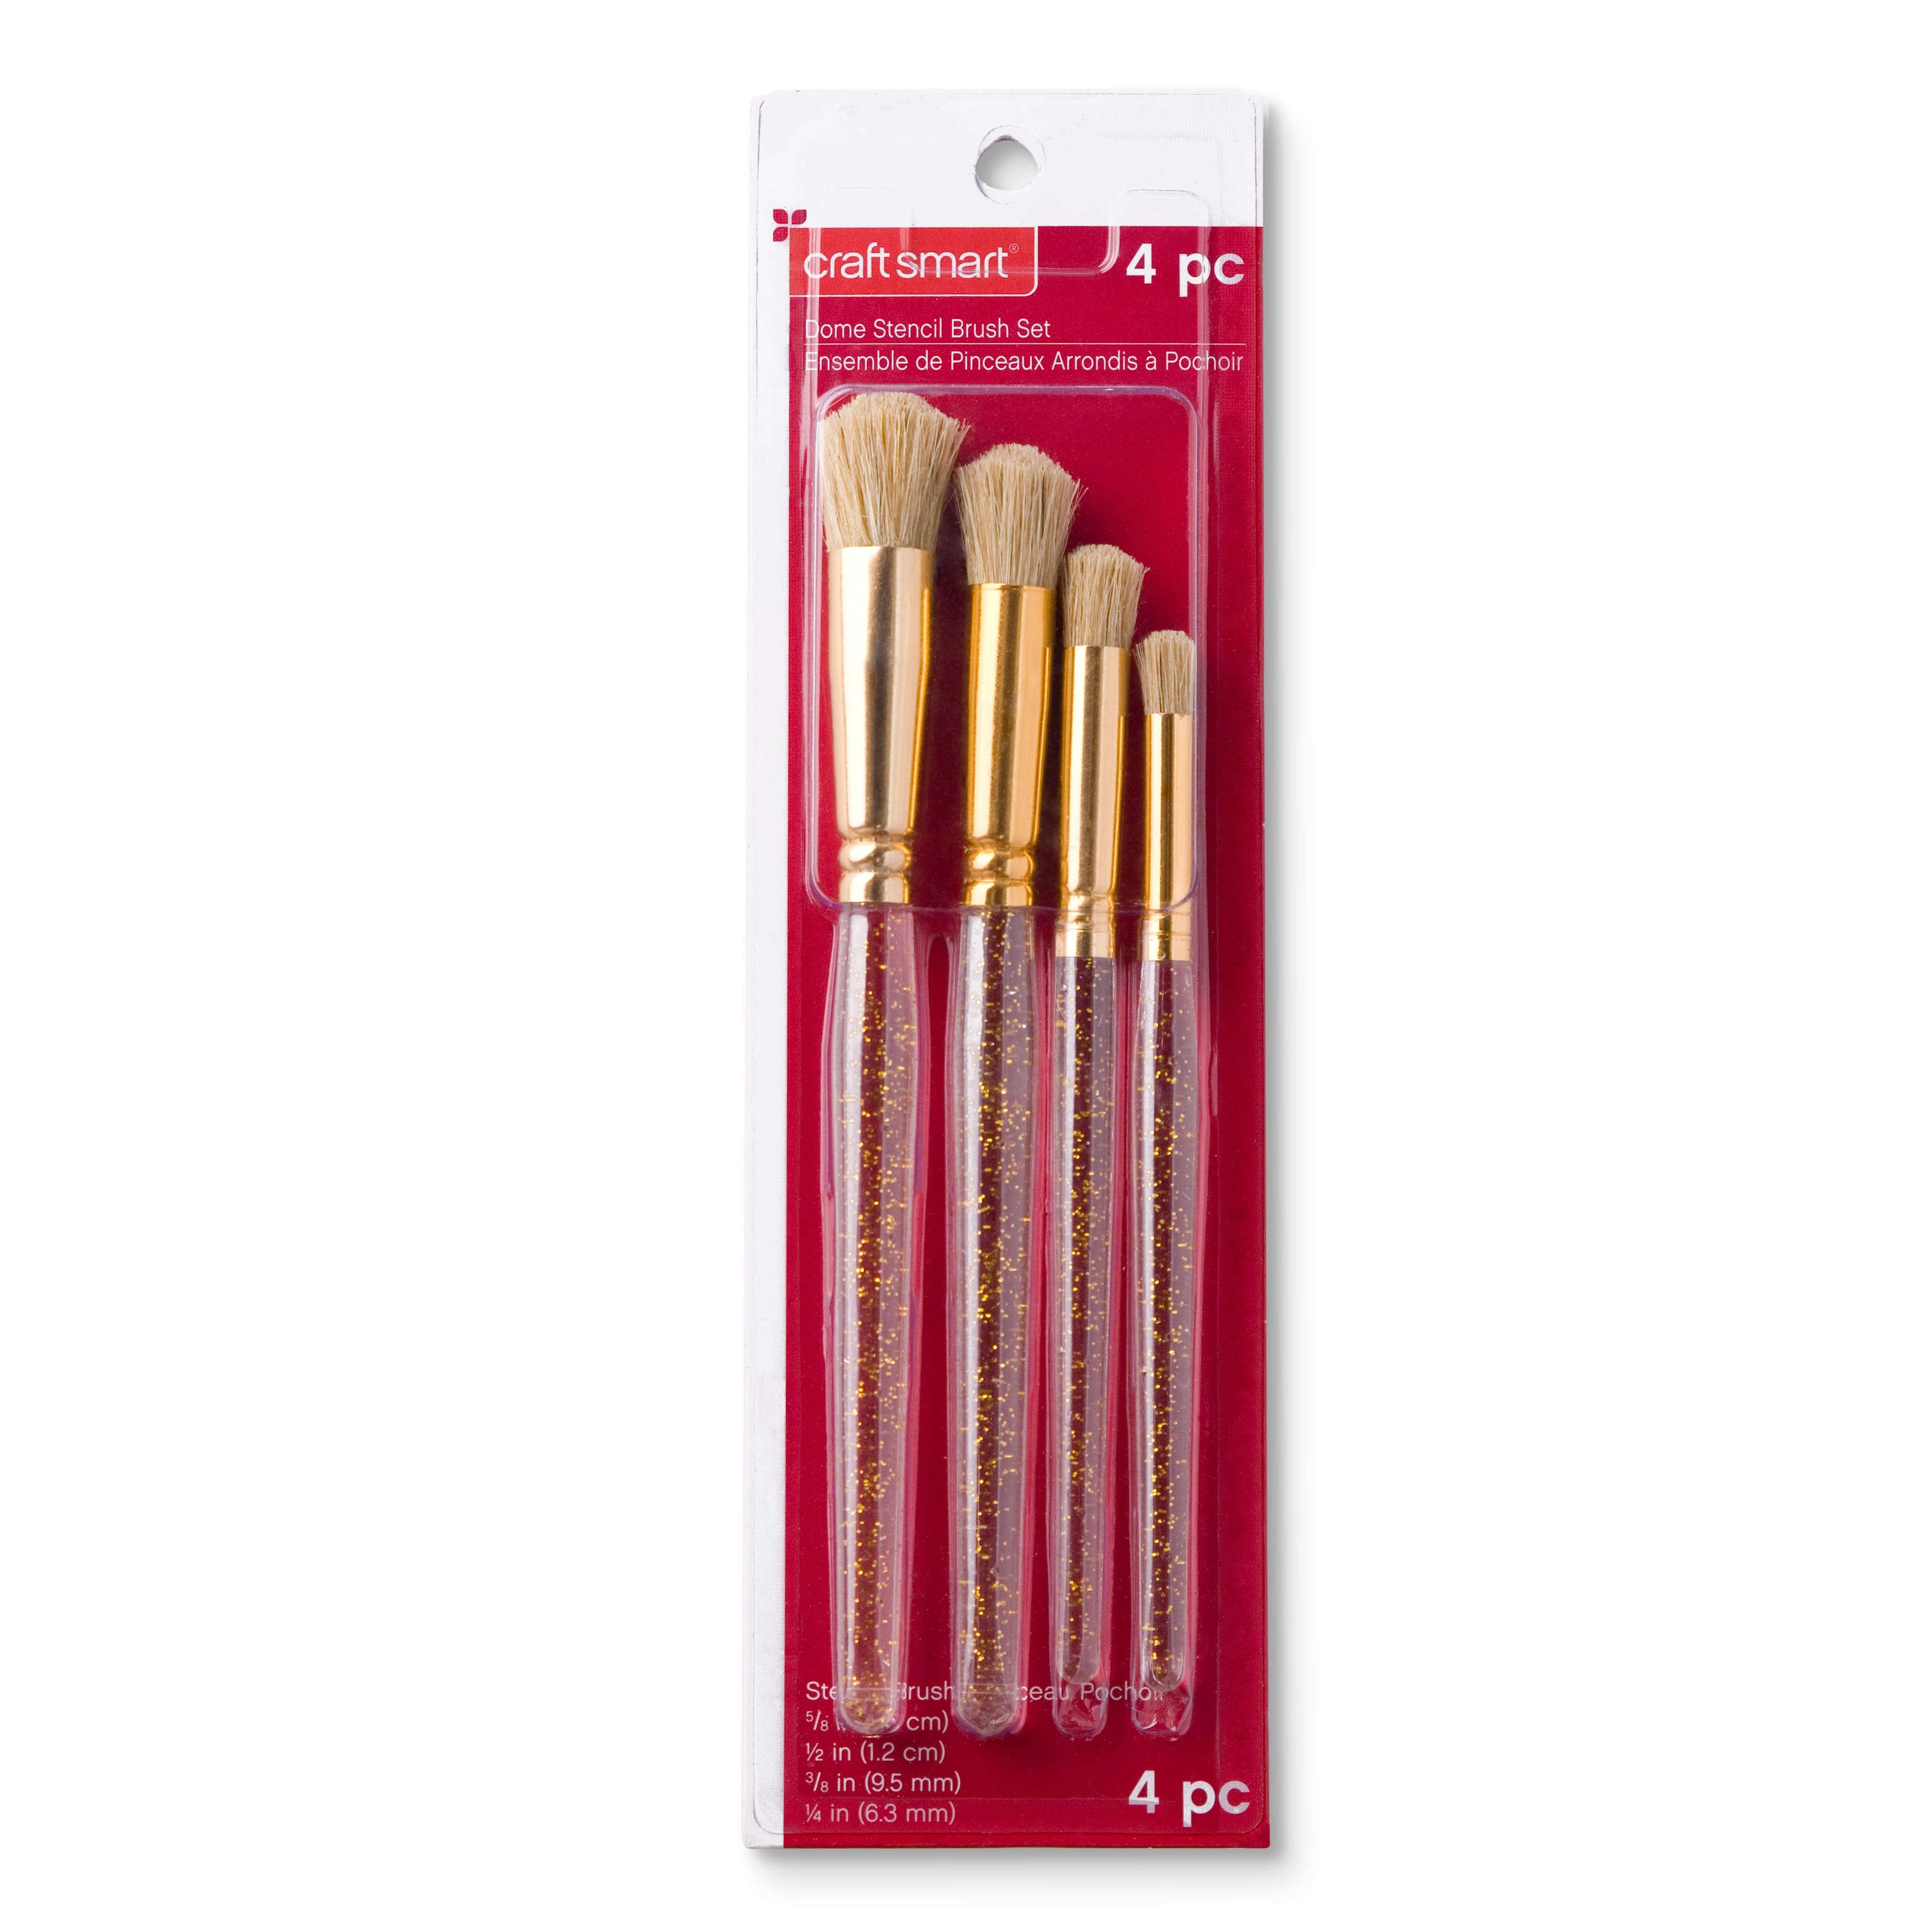 Wooden Stencil Brushes Natural Stencil Bristle Brushes Dome Art